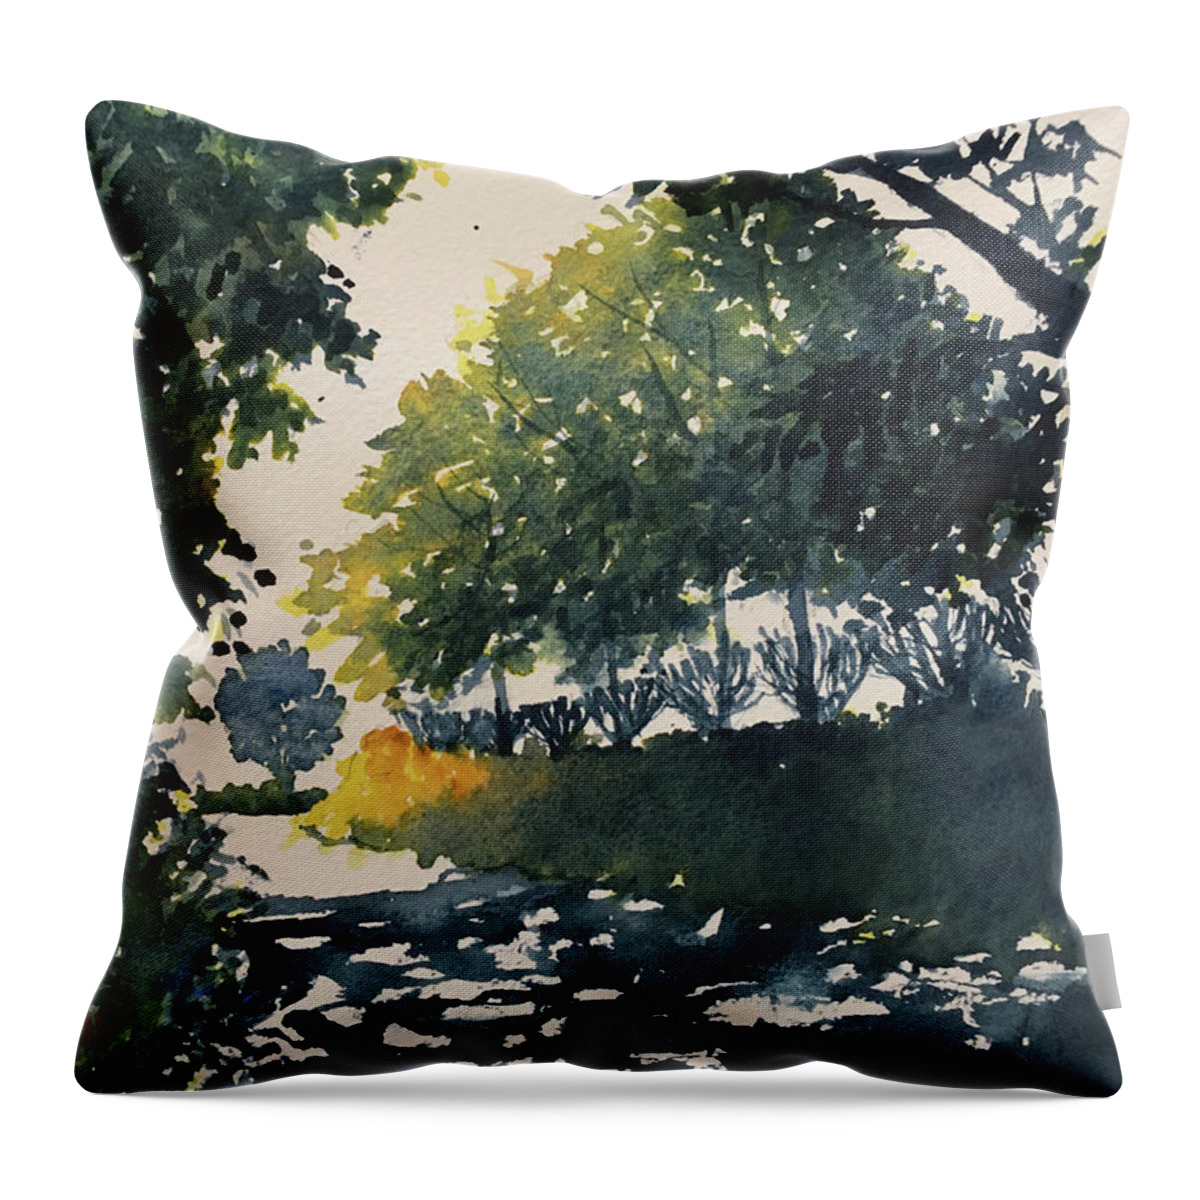 Watercolour Throw Pillow featuring the painting Light and Darks on Turkey Lane by Glenn Marshall